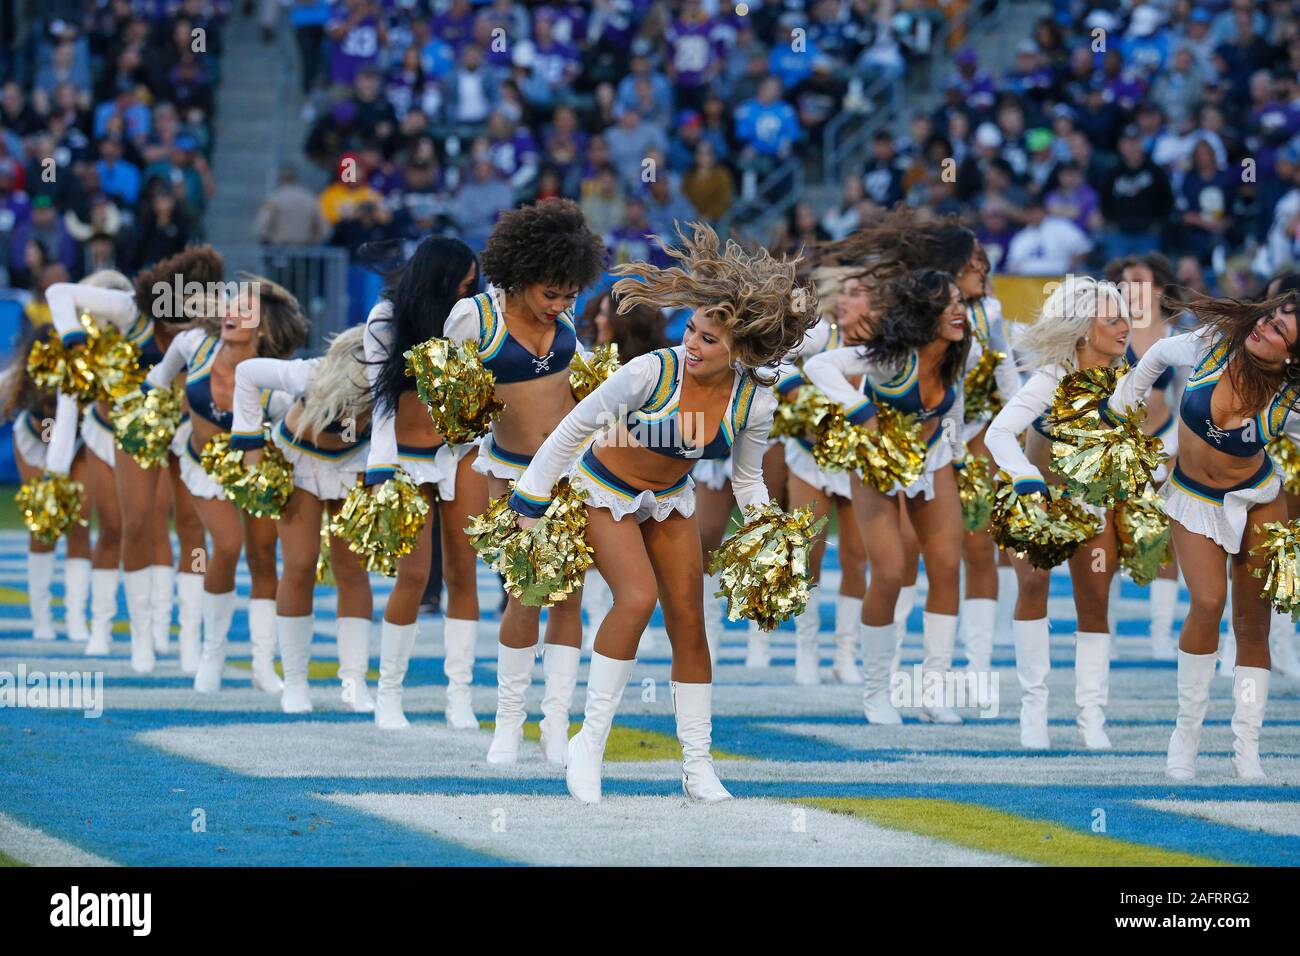 Carson, California, USA. 15th Dec, 2019. Los Angeles Chargers cheerleaders during the NFL game between the Los Angeles Chargers and the Minnesota Vikings at the Dignity Health Sports Park in Carson, California. Charles Baus/CSM/Alamy Live News Stock Photo